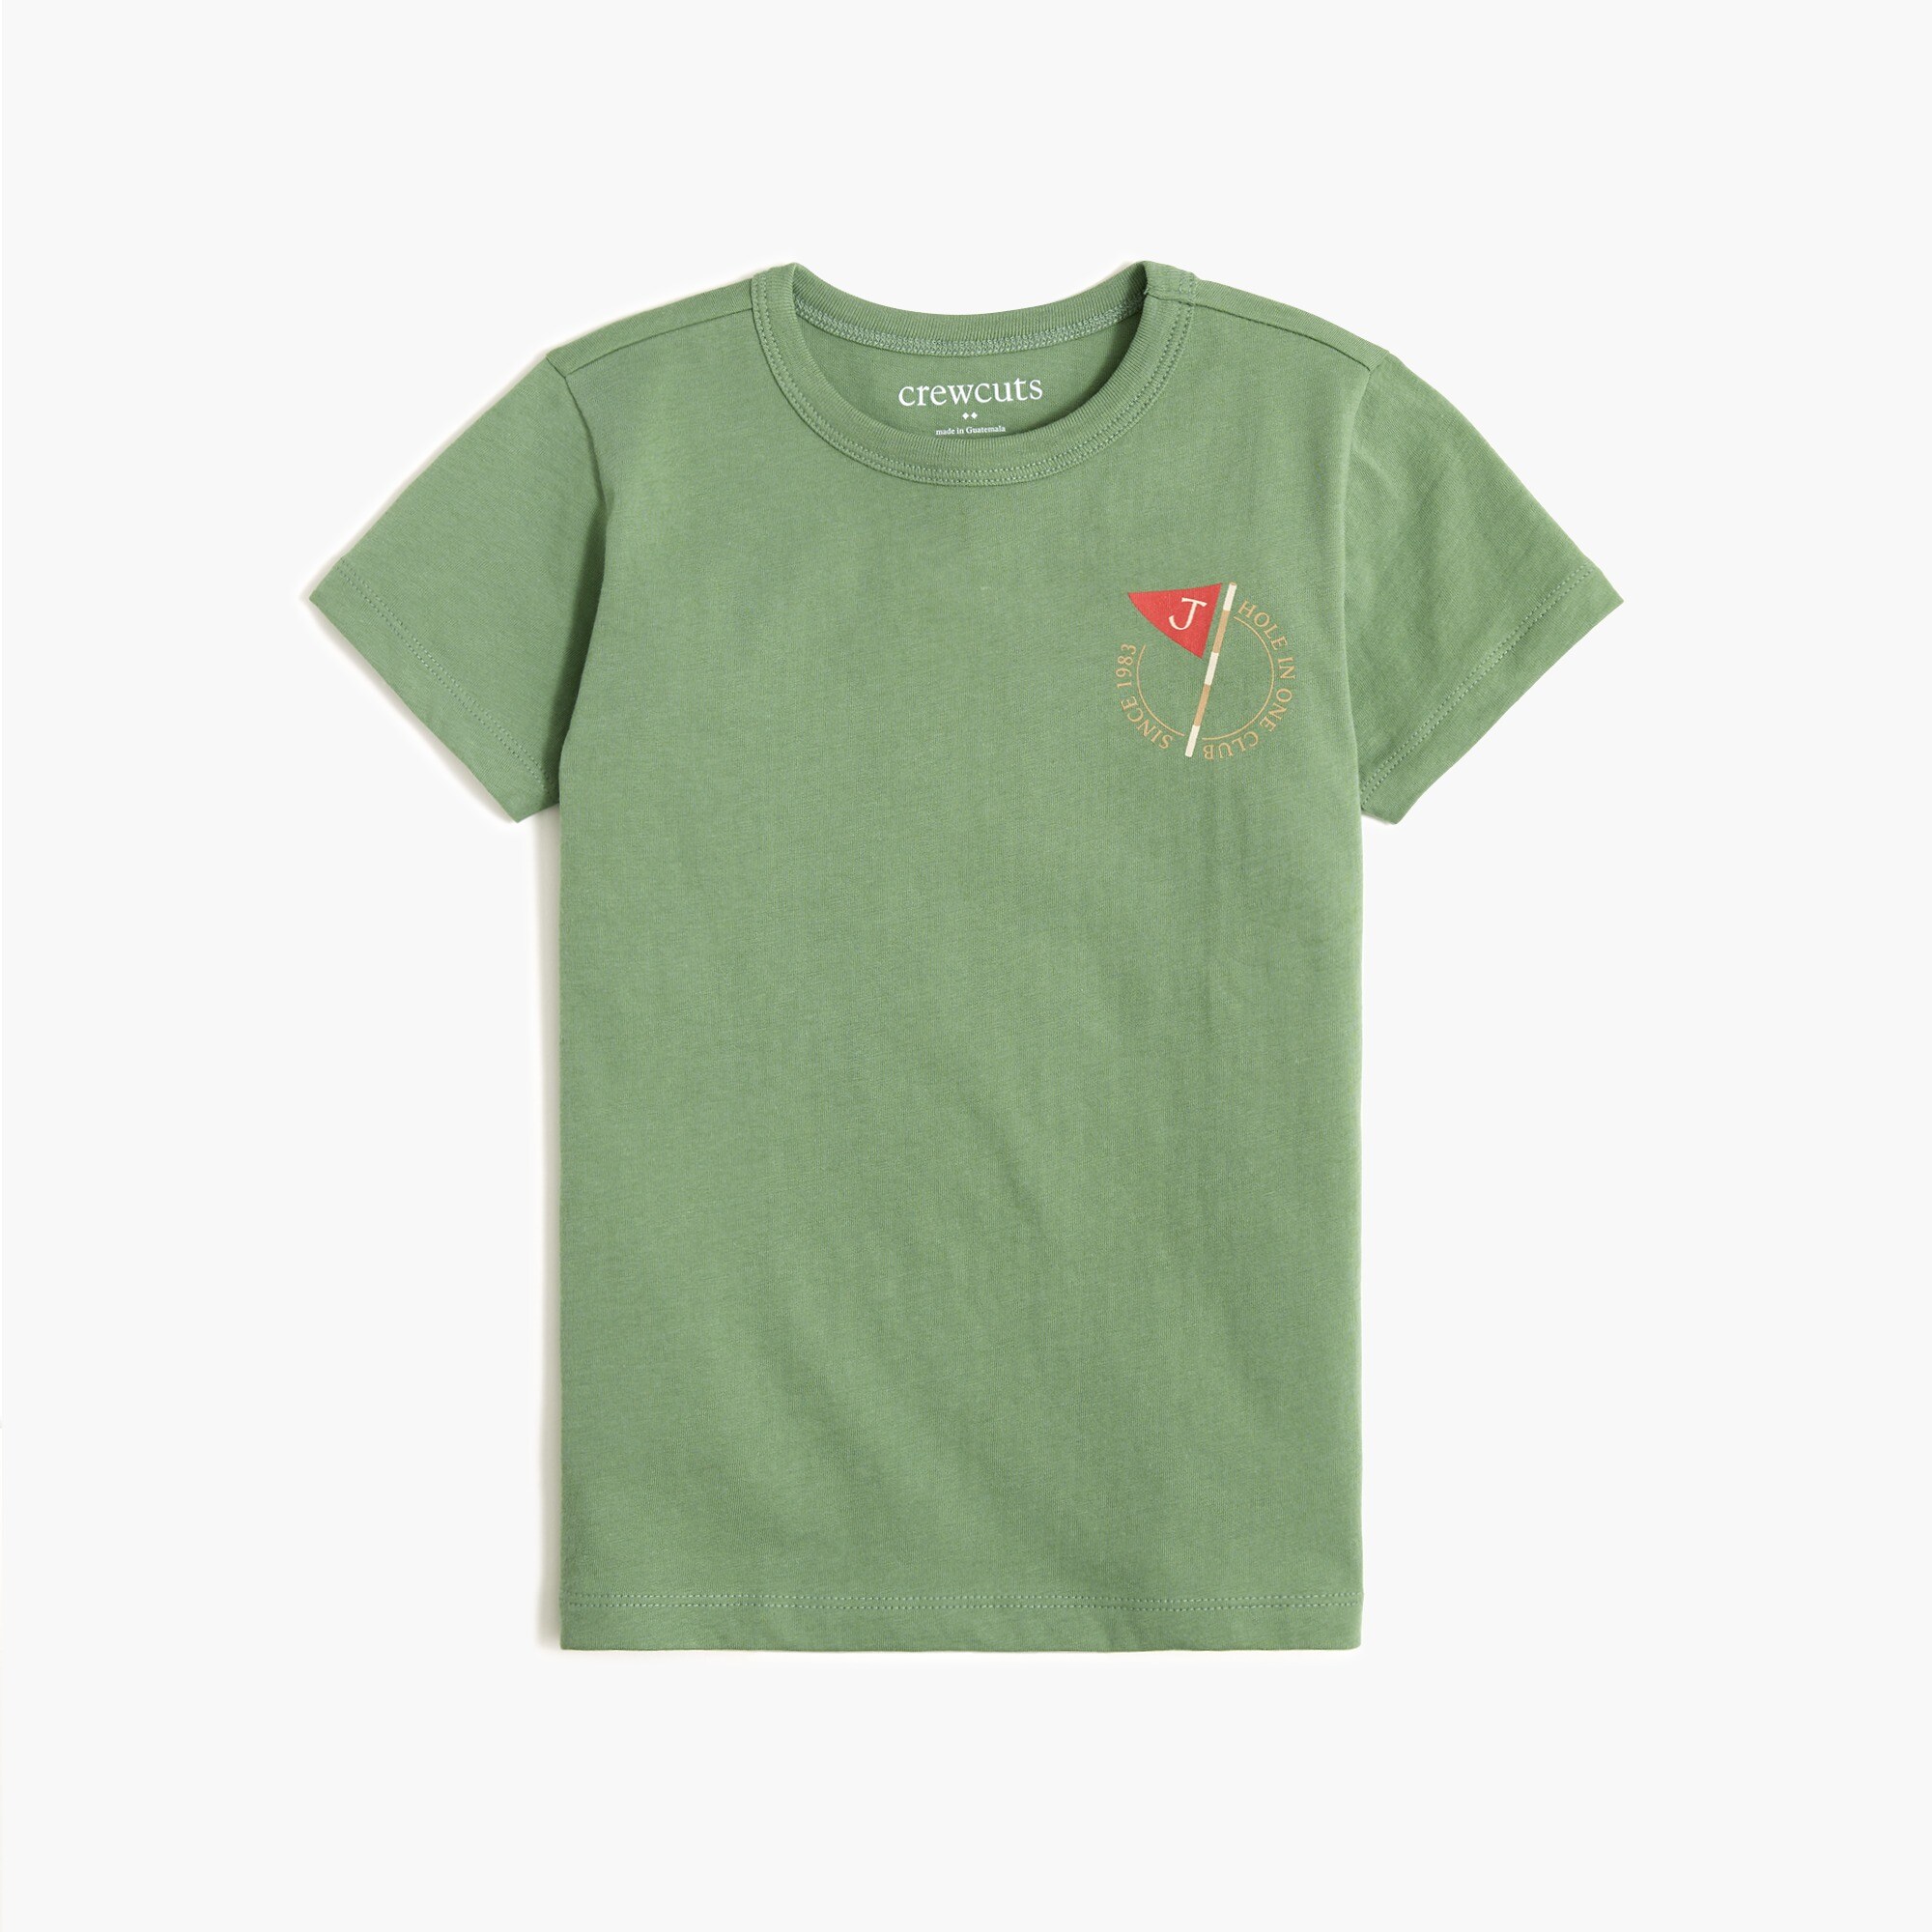 boys Boys' hole in one graphic tee